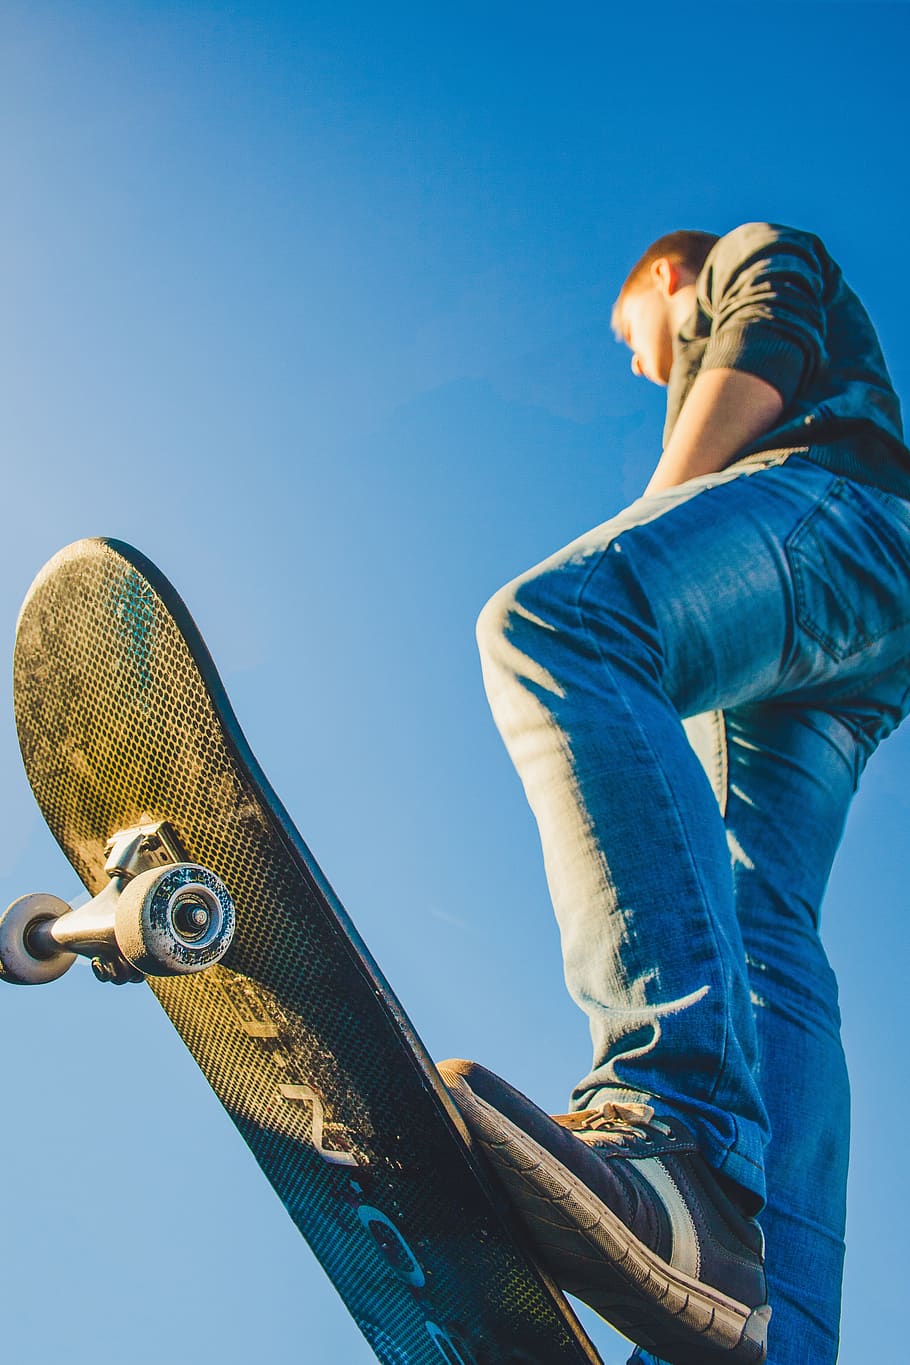 skate, sky, man, skateboarder, one person, clear sky, blue, low angle view, casual clothing, side view